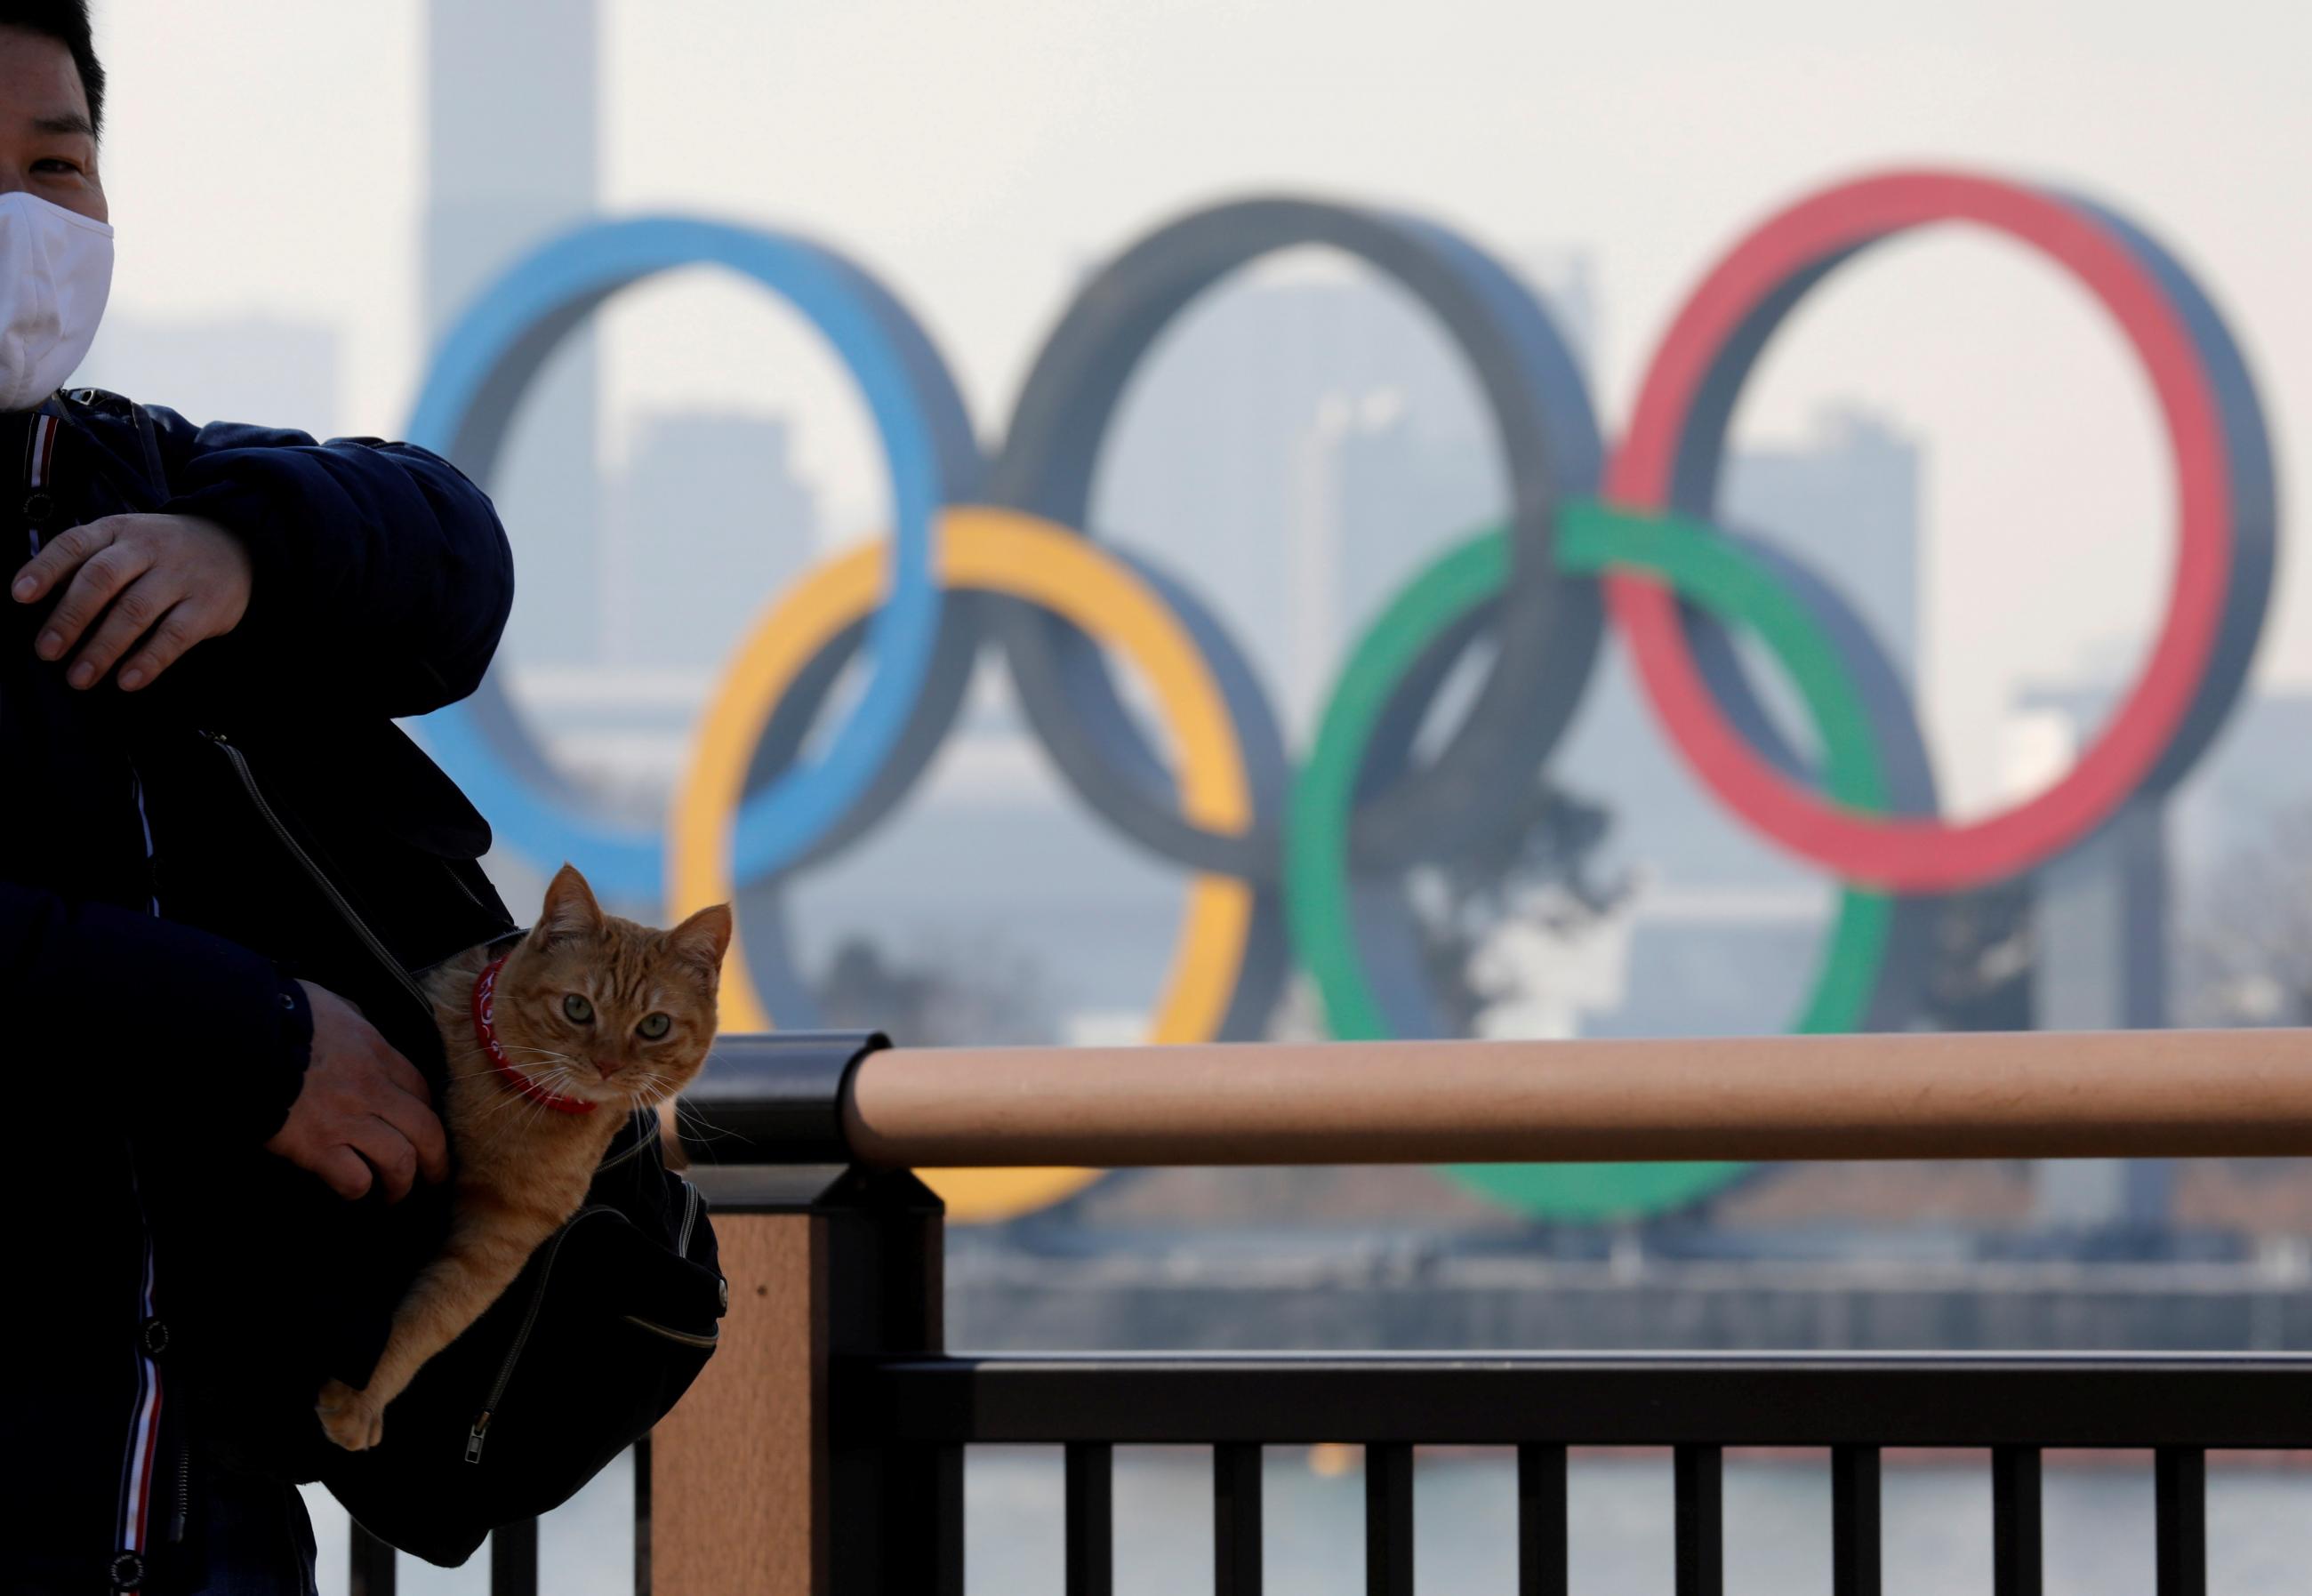 A man, accompanied by his cat, wears a mask to protect against COVID-19 while on a visit to a park with a view of the giant Olympic rings, in Tokyo, Japan on January 22, 2021.